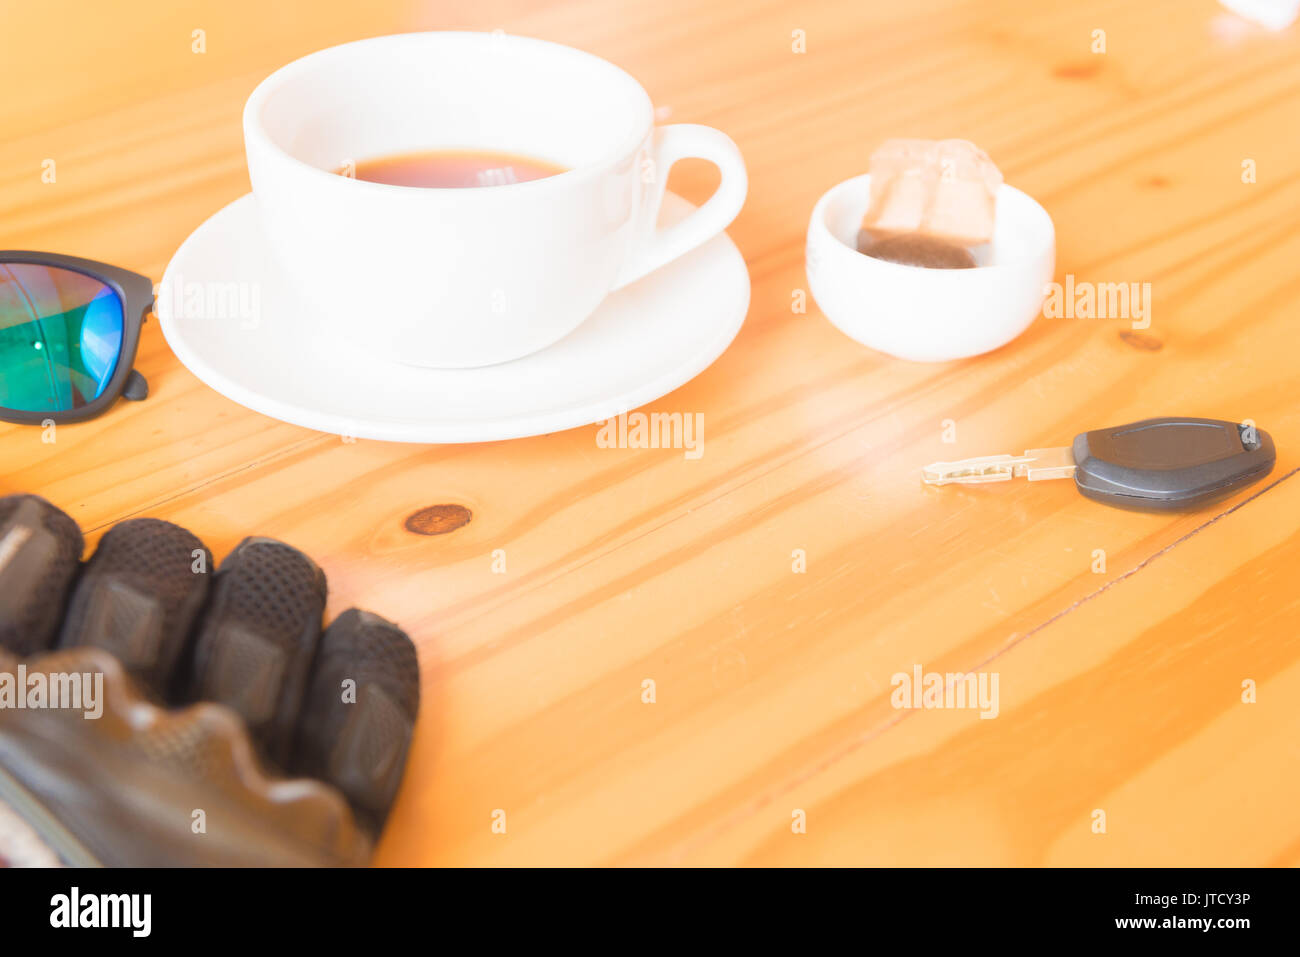 driving glove and glasses place near tea cup on the wooden table Stock Photo